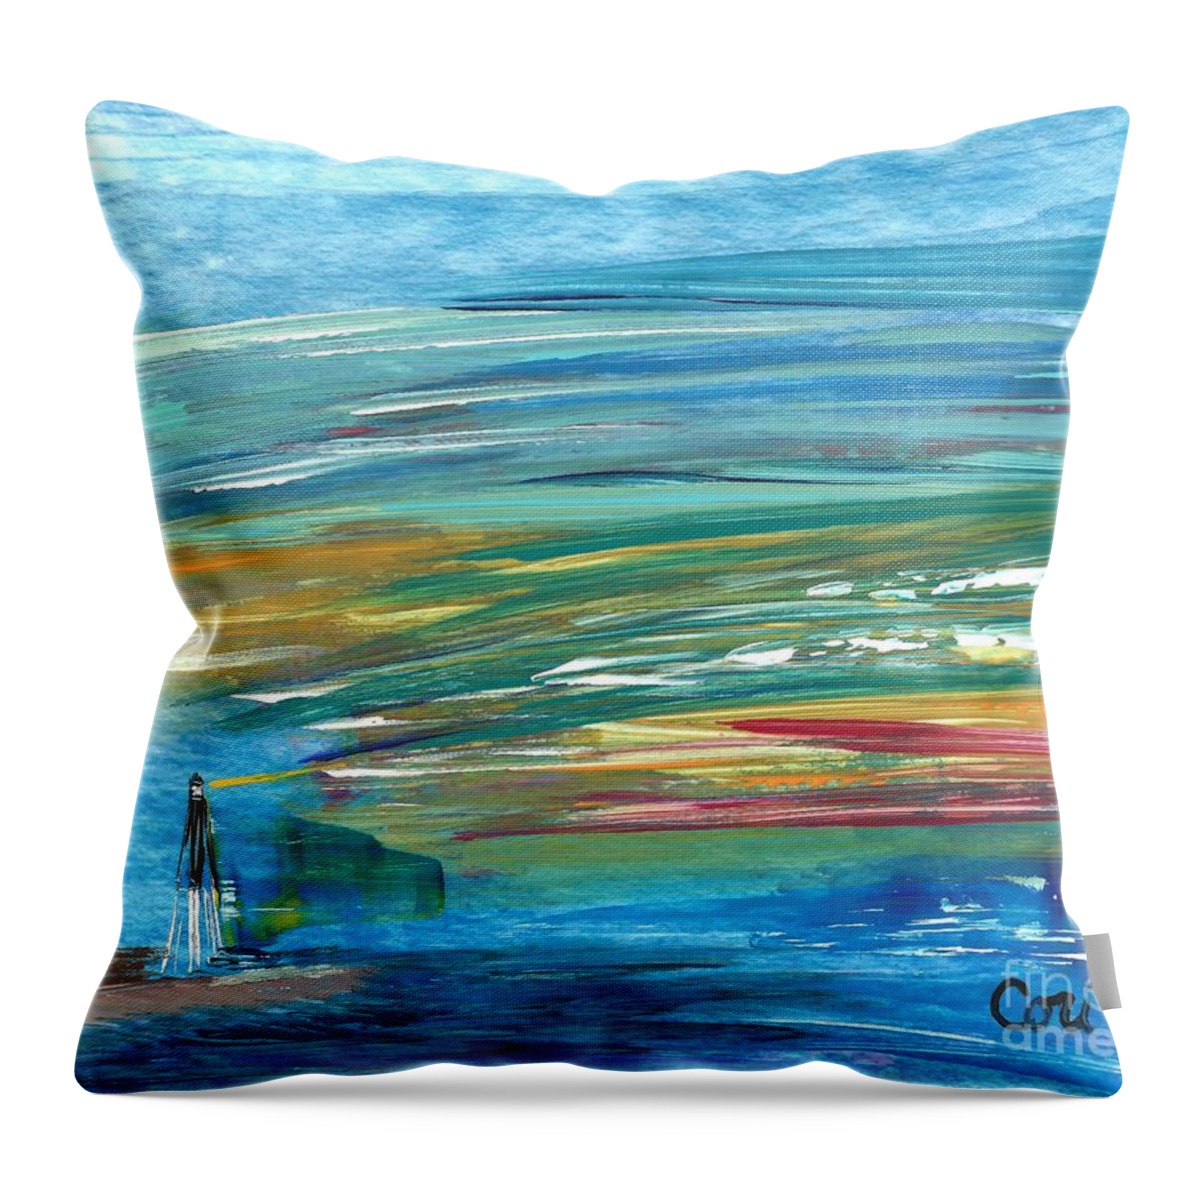 Lighthouse Throw Pillow featuring the painting Lighthouse by Corinne Carroll